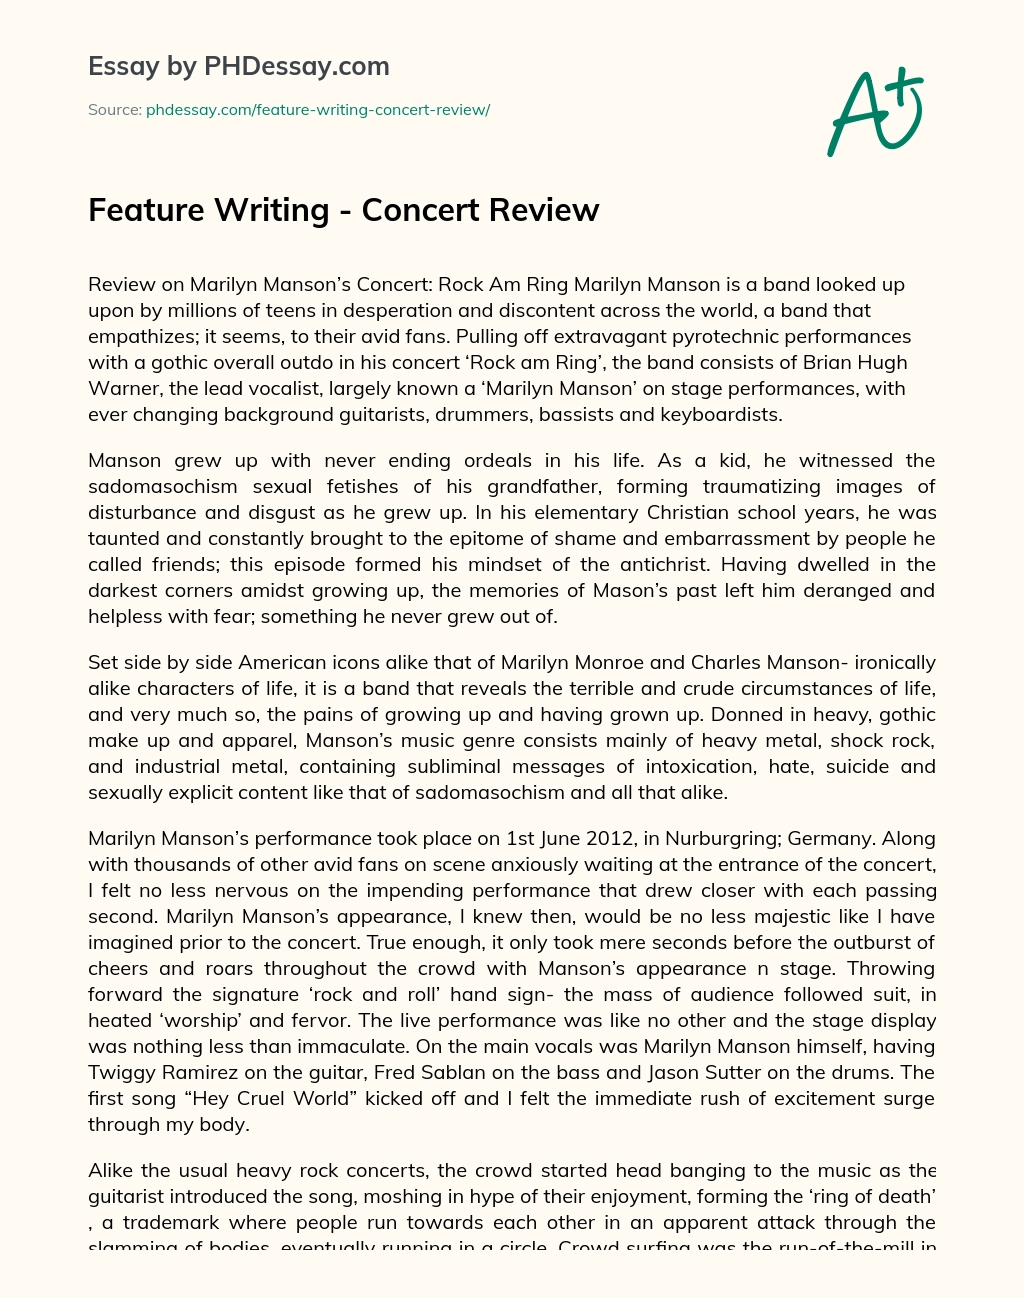 concert review essay examples